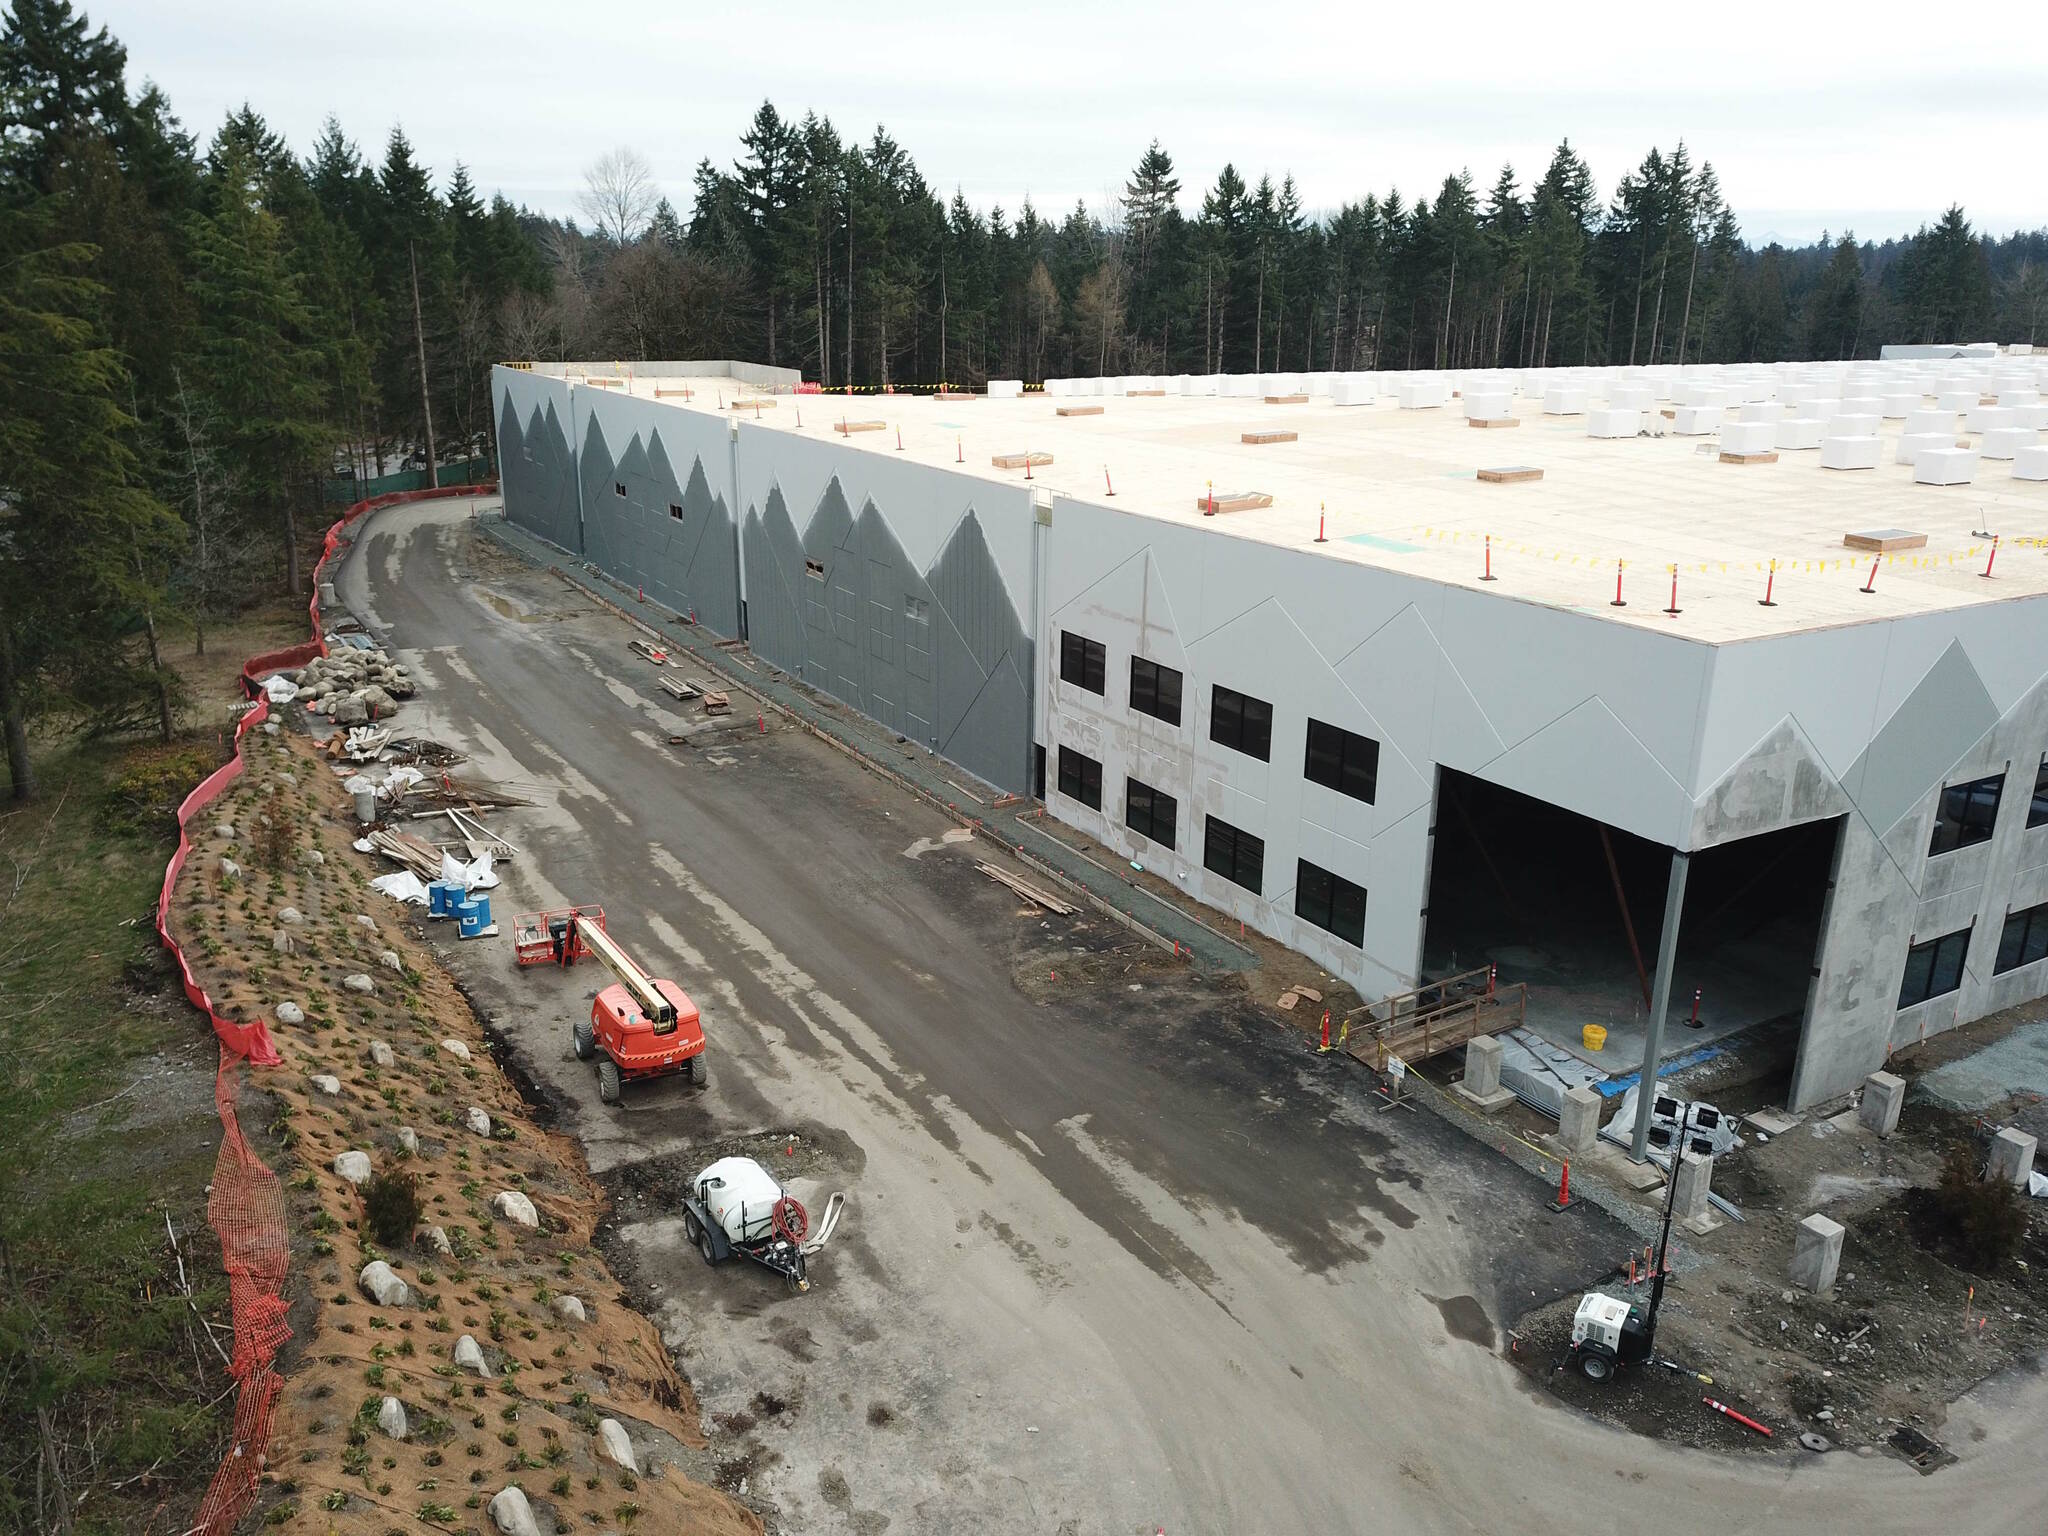 Buildings A and B of Woodbridge’s campus plan on the former Weyerhaeuser campus are projected to come online this year. Photo by Bruce Honda.